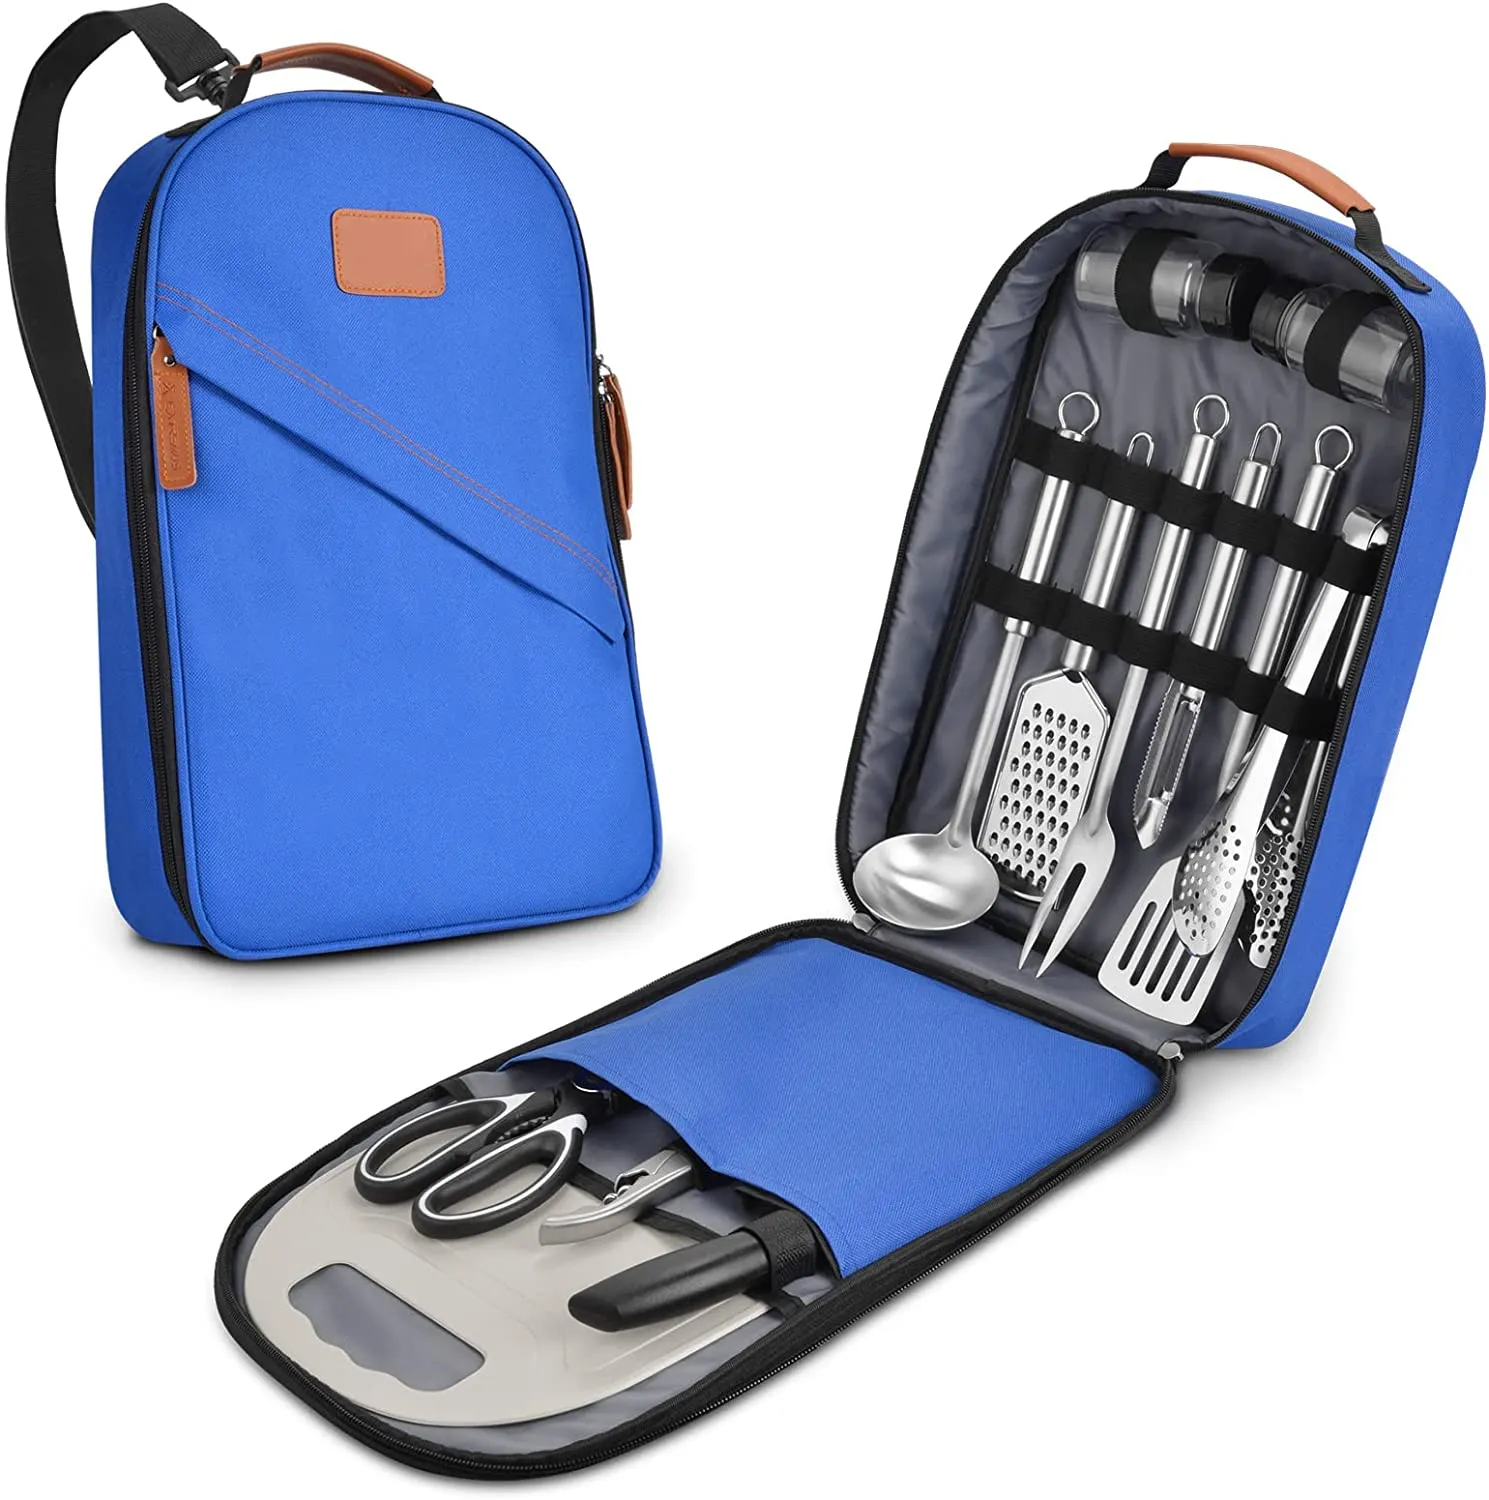 Portable Utensils Travel Camping Cutlery Utensil Picnic Set Camping Kitchen Cooking Utensil Set for Backpacking BBQ Camping